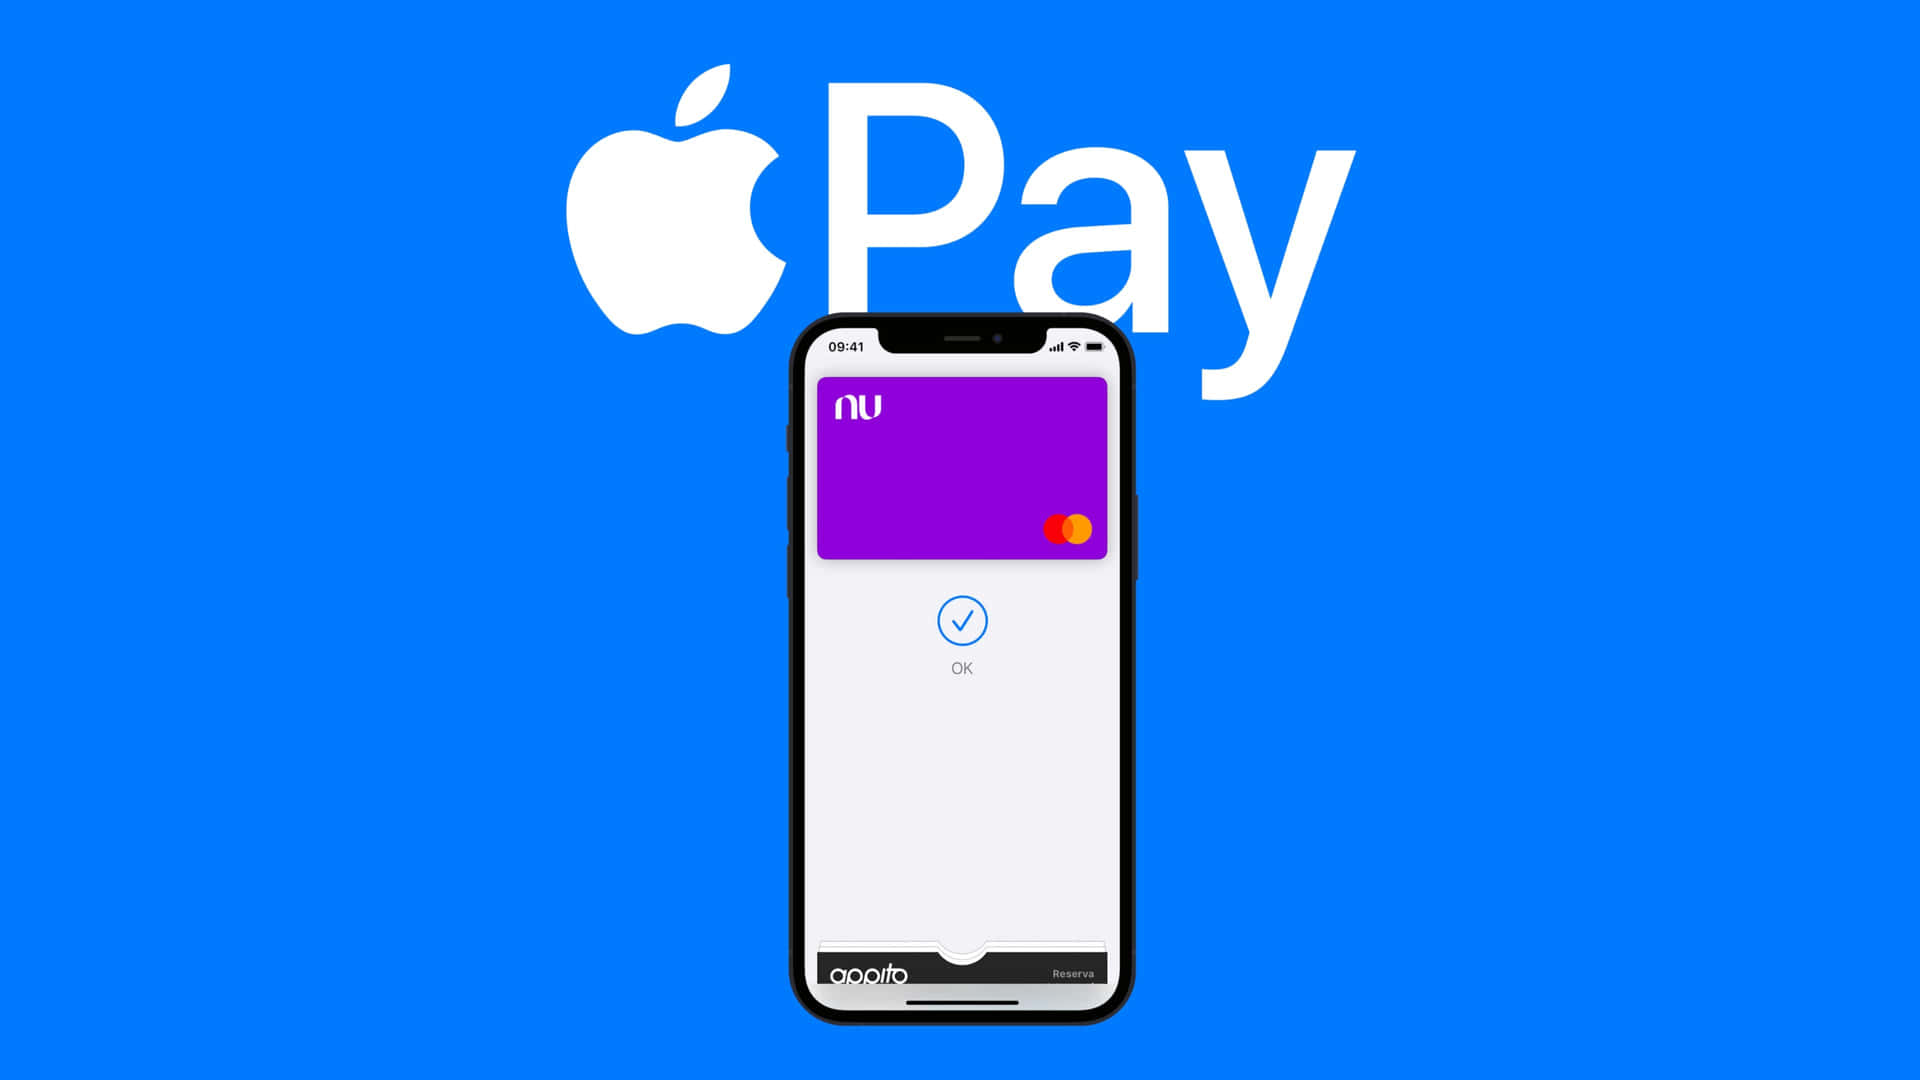 Join the Revolution of Contactless Payment with Apple Pay